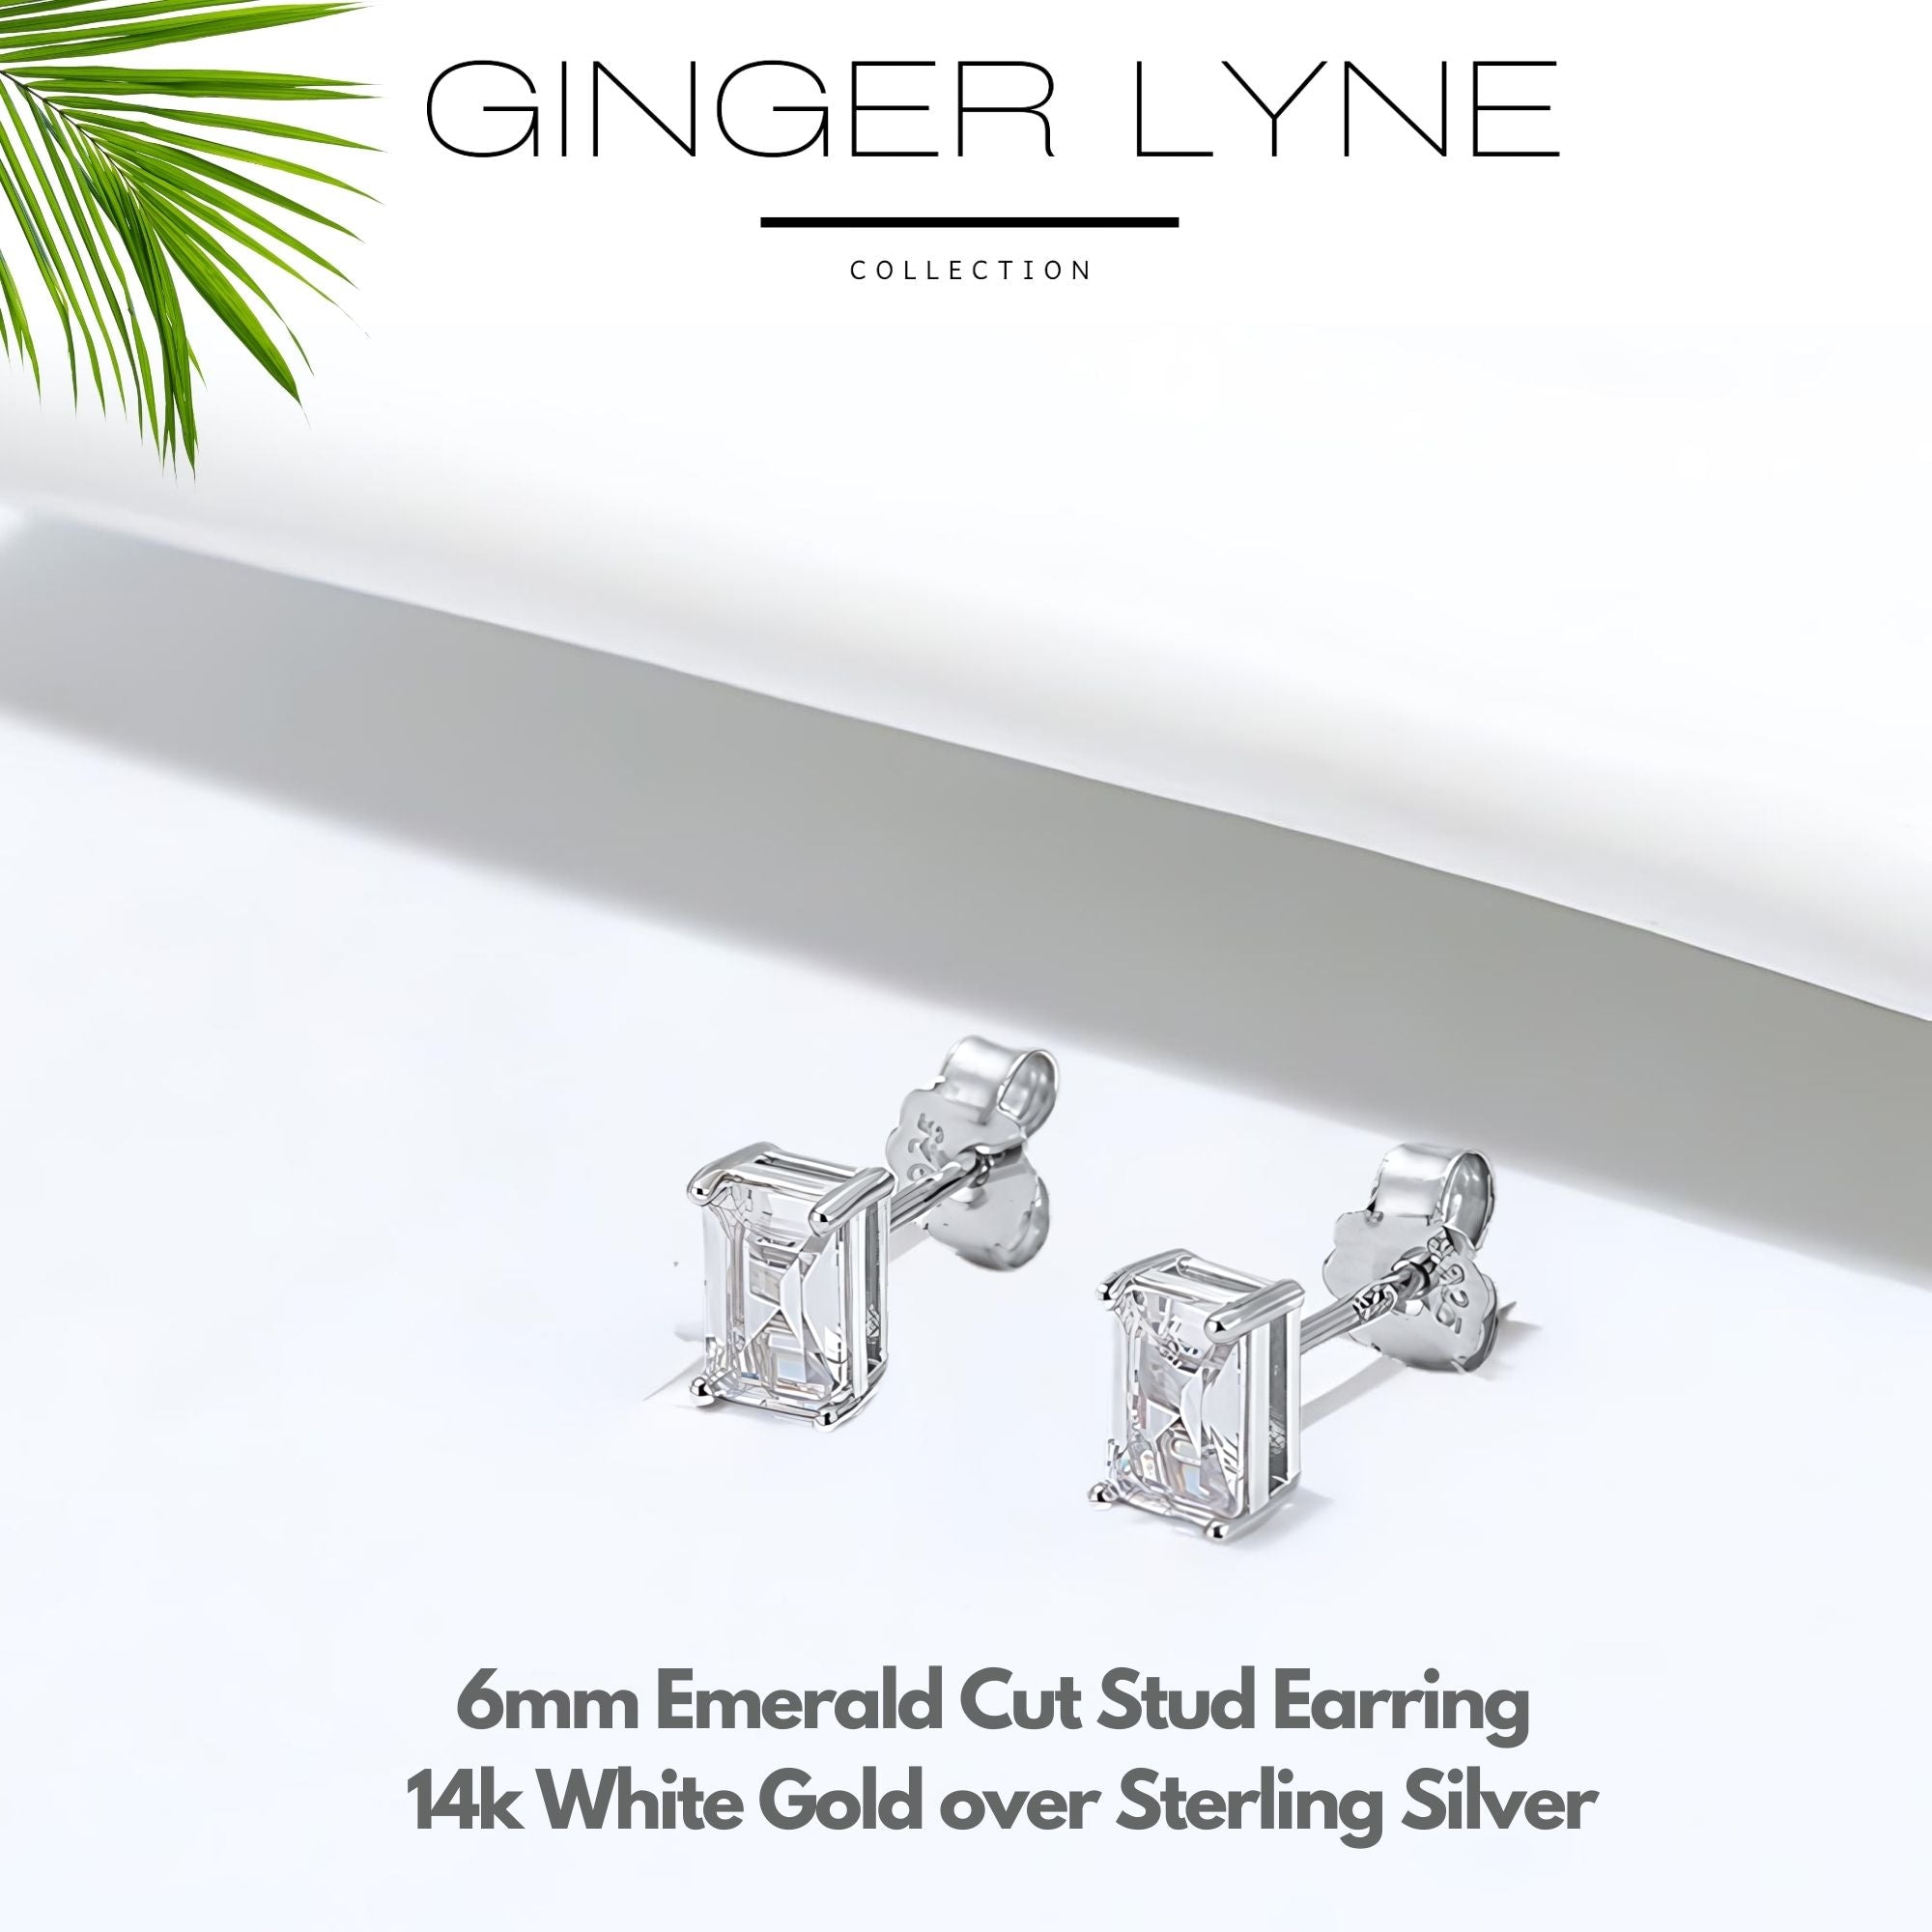 Emerald Cut Stud Earrings for Women or Men Sterling Silver Studs for her Ginger Lyne Collection - Emerald Stud